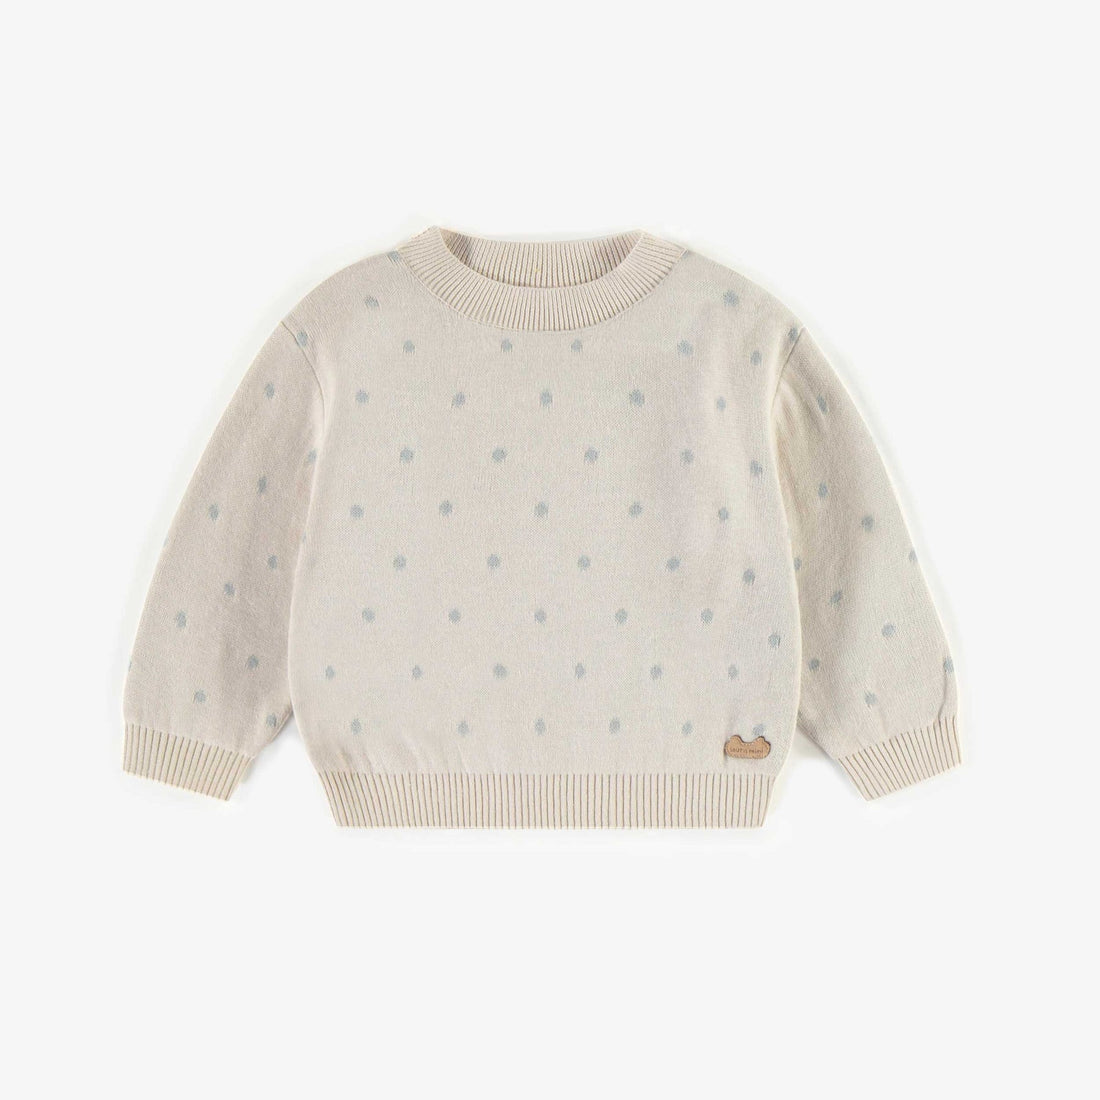 CREAM PATTERNED SWEATER WITH BLUE POLKA DOTS, NEWBORN